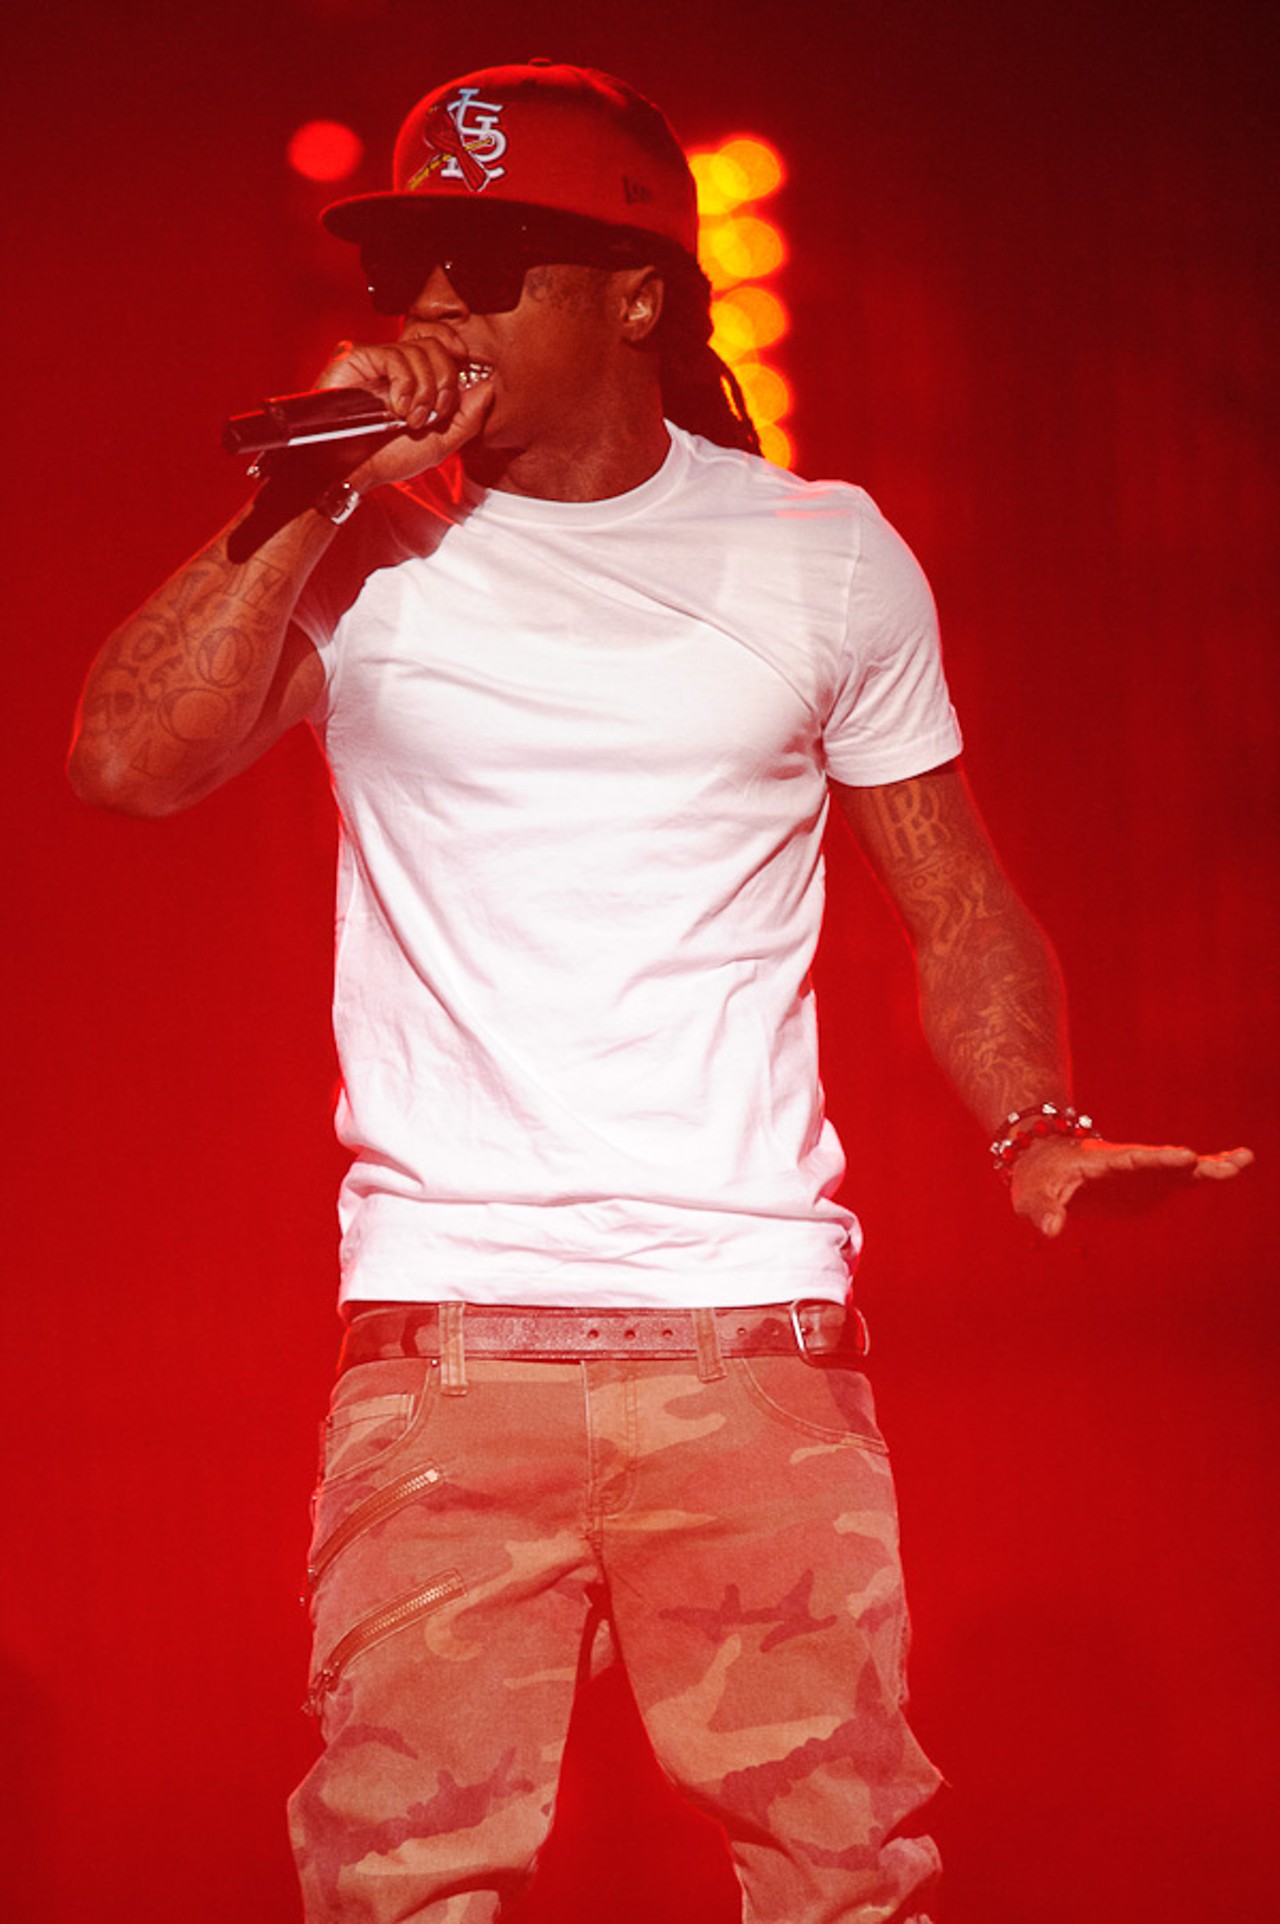 Lil Wayne performing at the Scottrade Center.